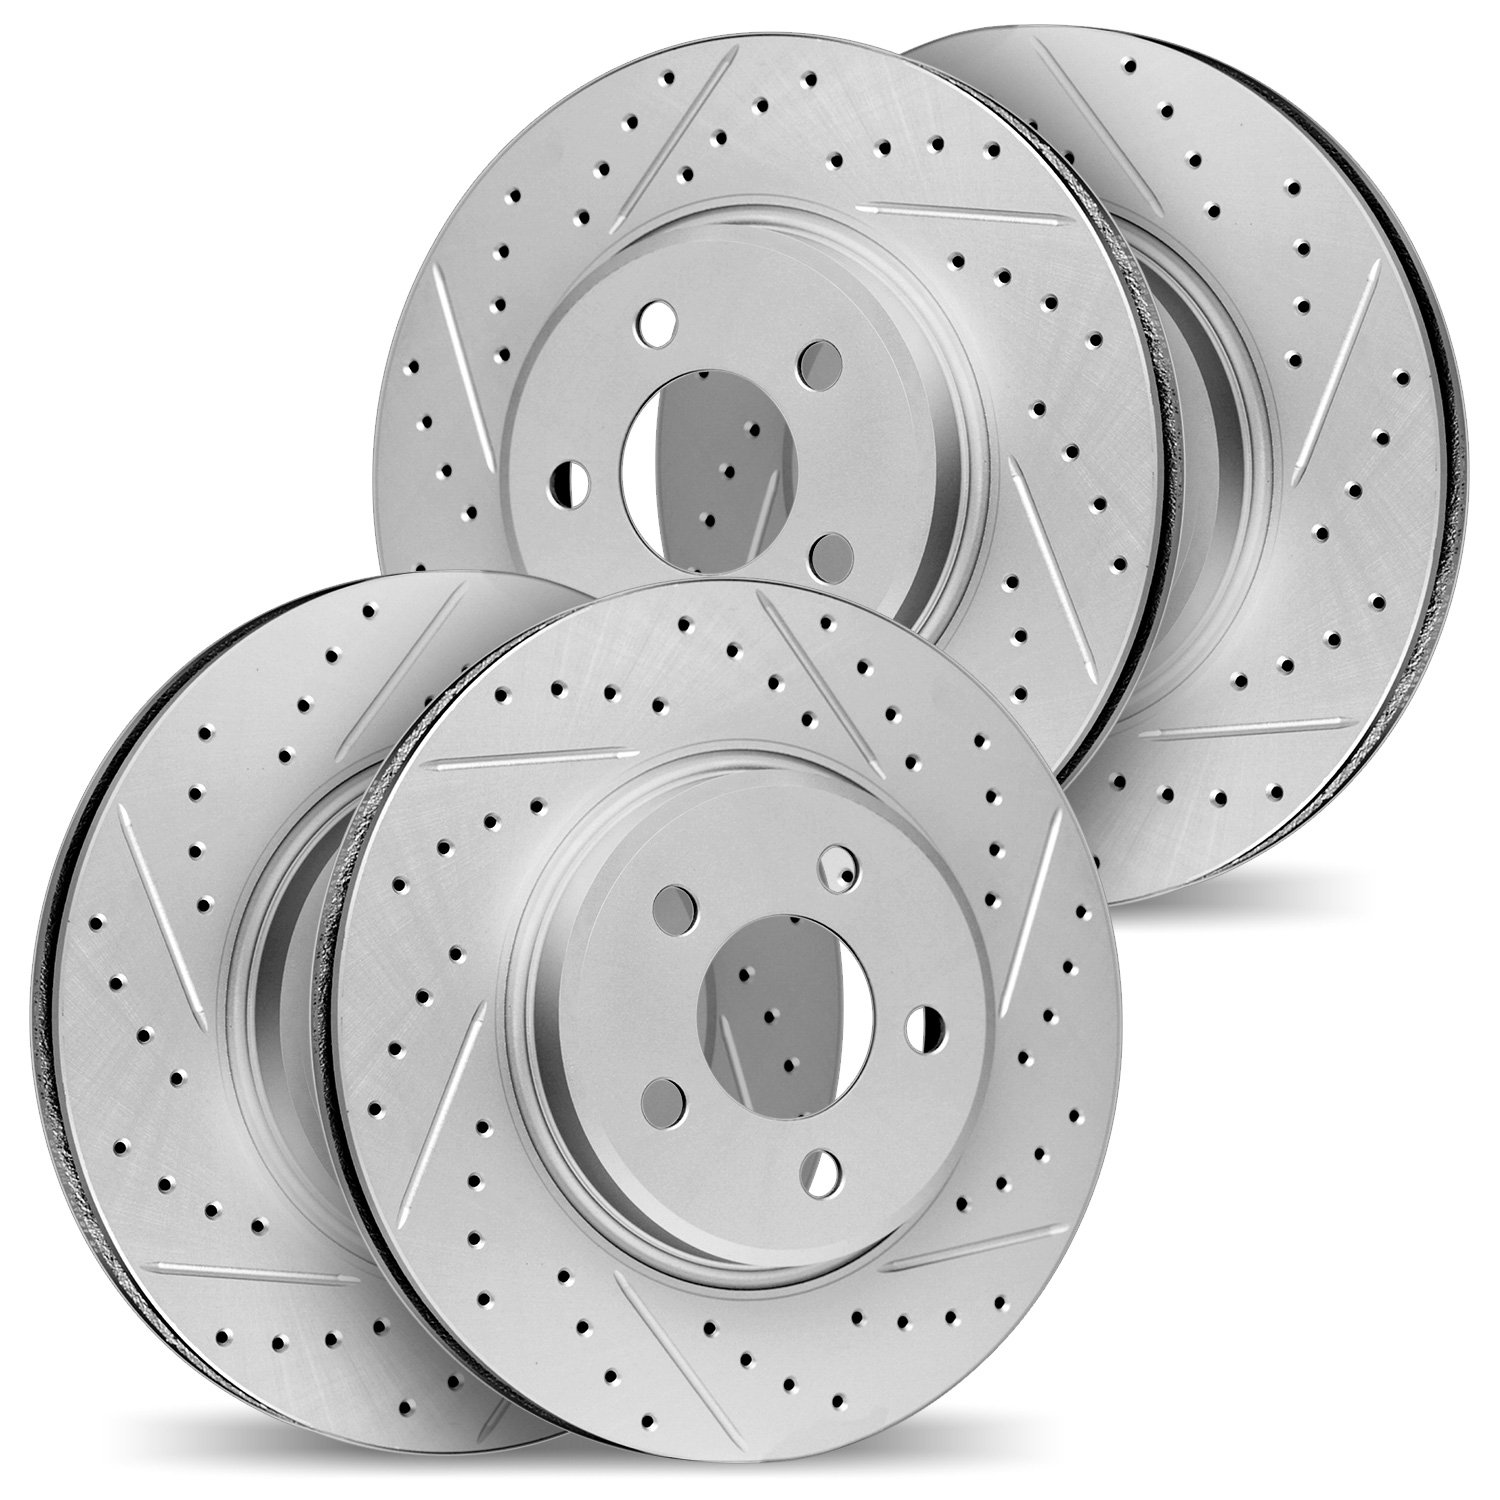 2004-31075 Geoperformance Drilled/Slotted Brake Rotors, 2003-2008 BMW, Position: Front and Rear